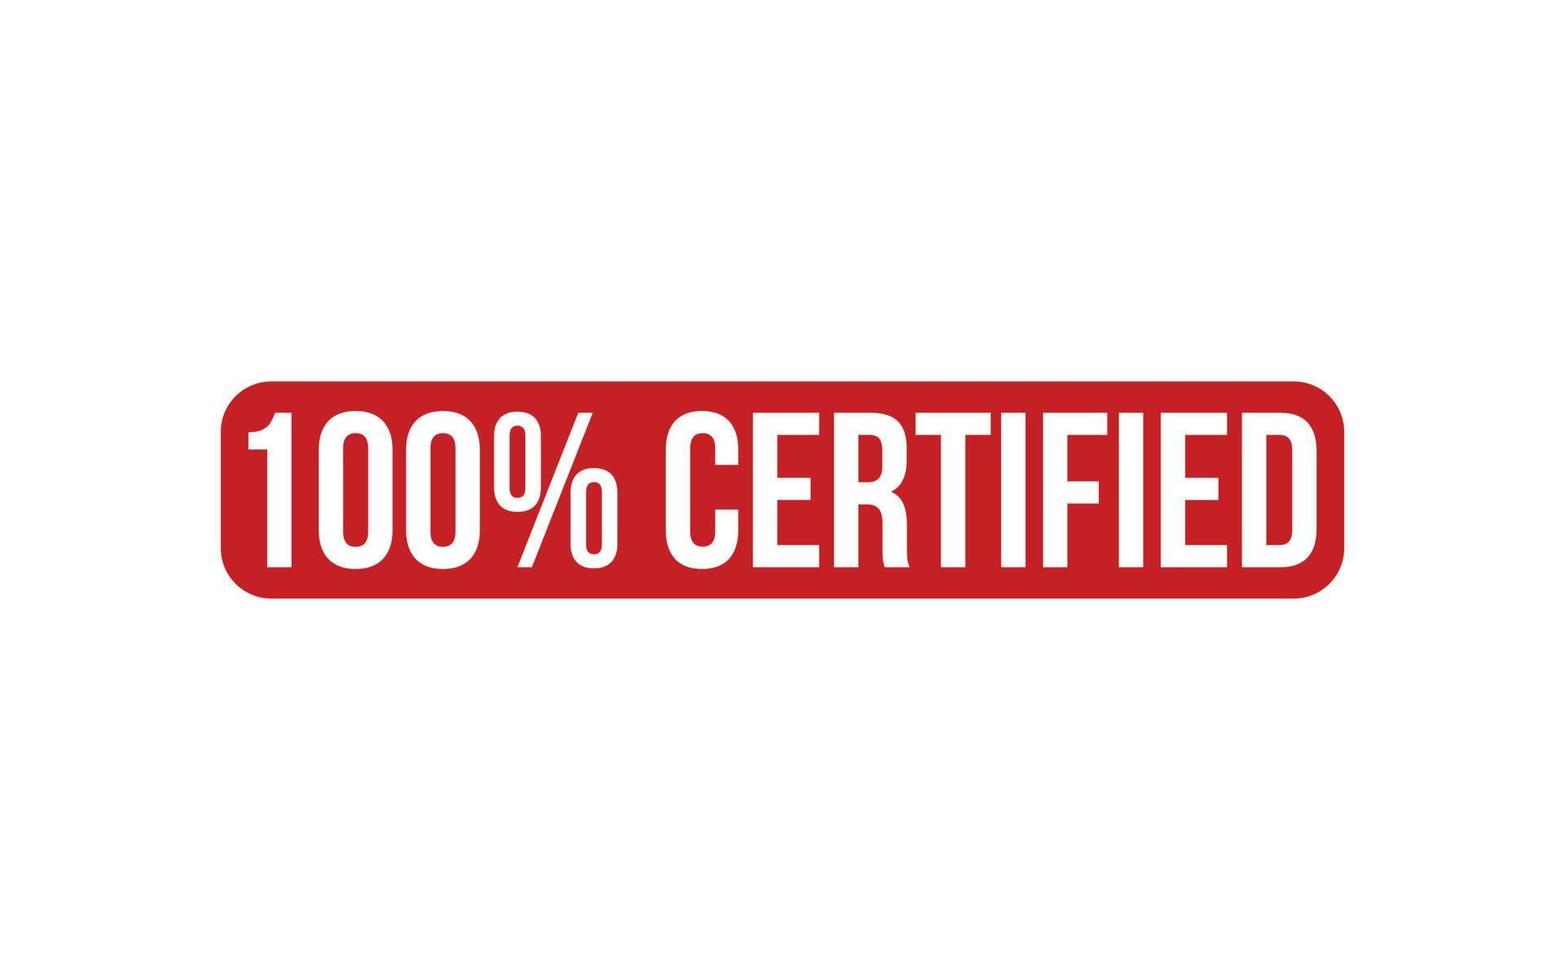 100 Percent Certified Rubber Stamp Seal Vector